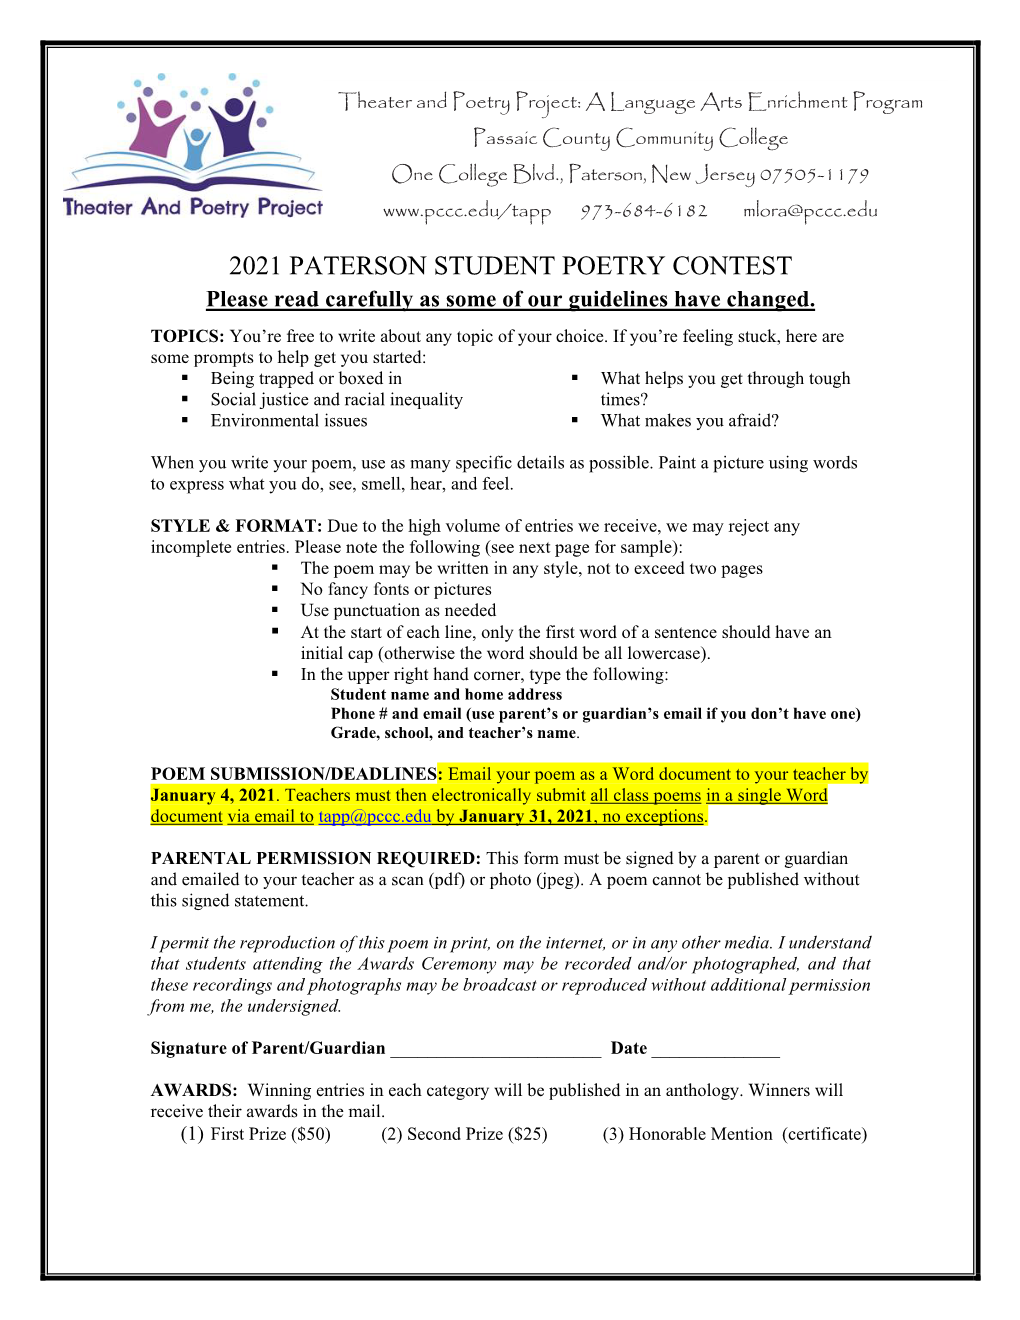 2021 PATERSON STUDENT POETRY CONTEST Please Read Carefully As Some of Our Guidelines Have Changed